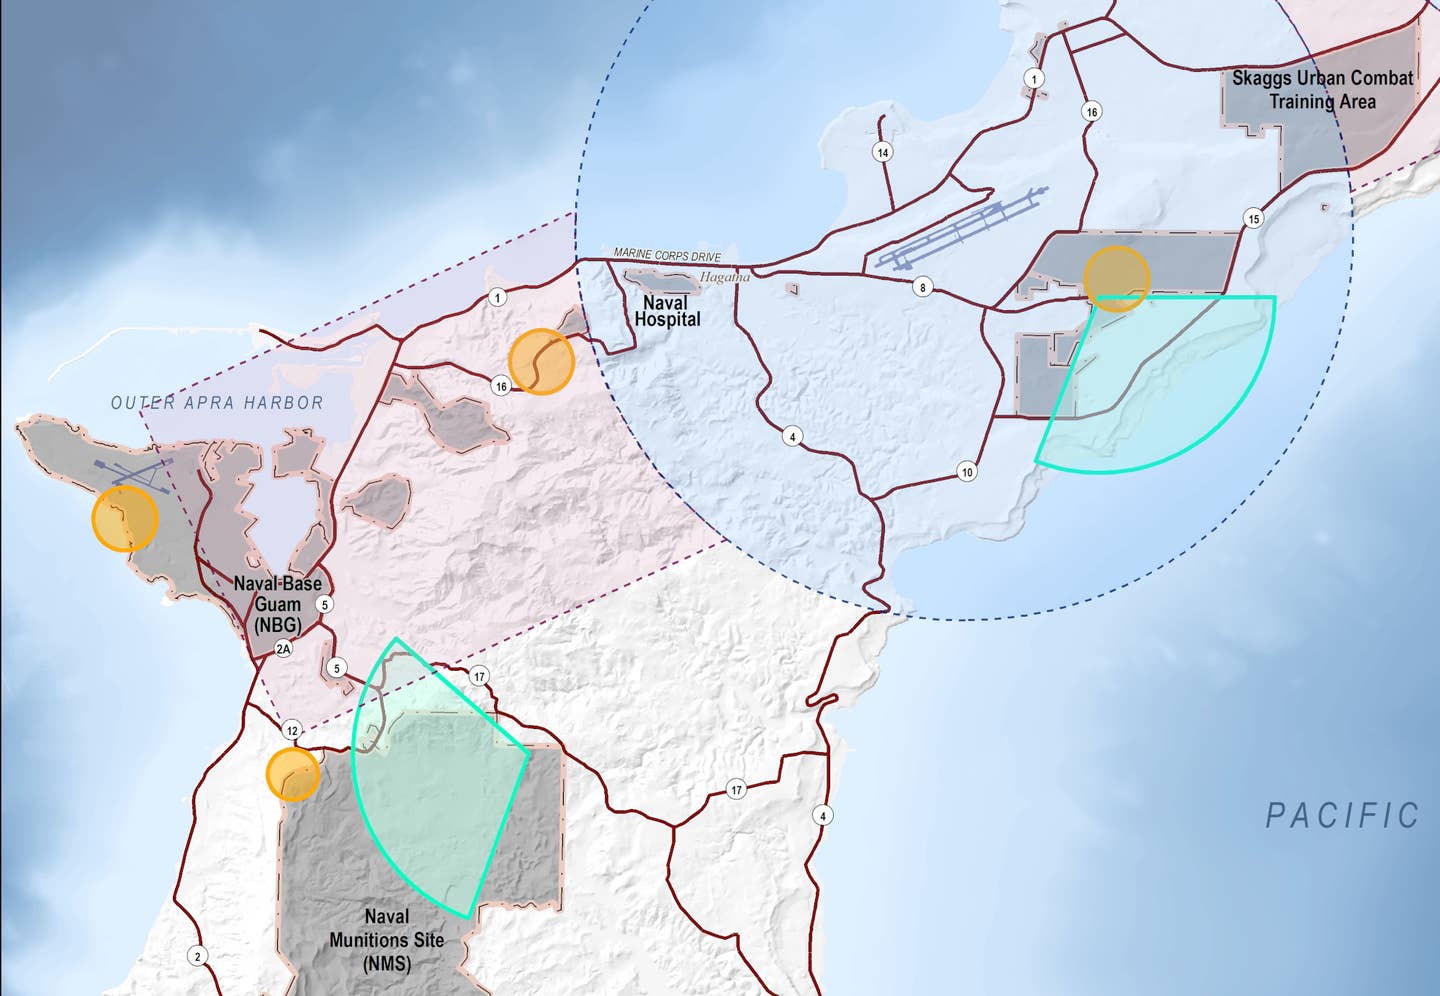 A portion of the radar/airspace map showing radar arcs, in teal, emanating from the Barrigada&nbsp;site, at right, and the Naval Munitions Site (NMS) complex, at left. A number of smaller radar arcs are also shown in yellow. <em>MDA</em>